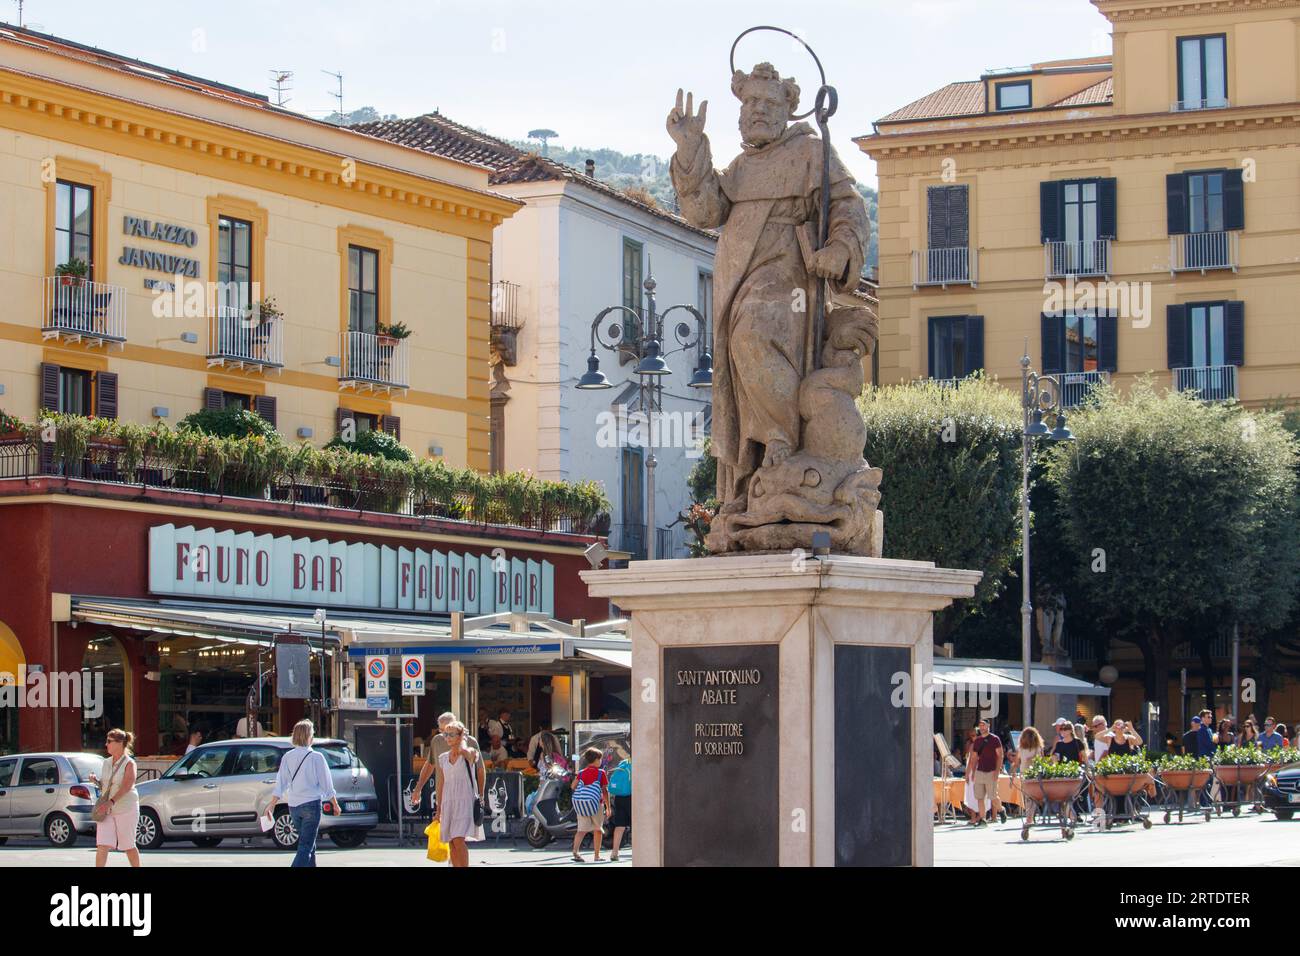 The statue of Sant' Antonino situated, Piazza Tassoin Square, Sorrento. Sorrento is a coastal town in southwestern Italy, facing the Bay of Naples on the Sorrentine Peninsula. Perched atop cliffs that separate the town from its busy marinas, it’s known for sweeping water views and Piazza Tasso, a cafe-lined square. Stock Photo